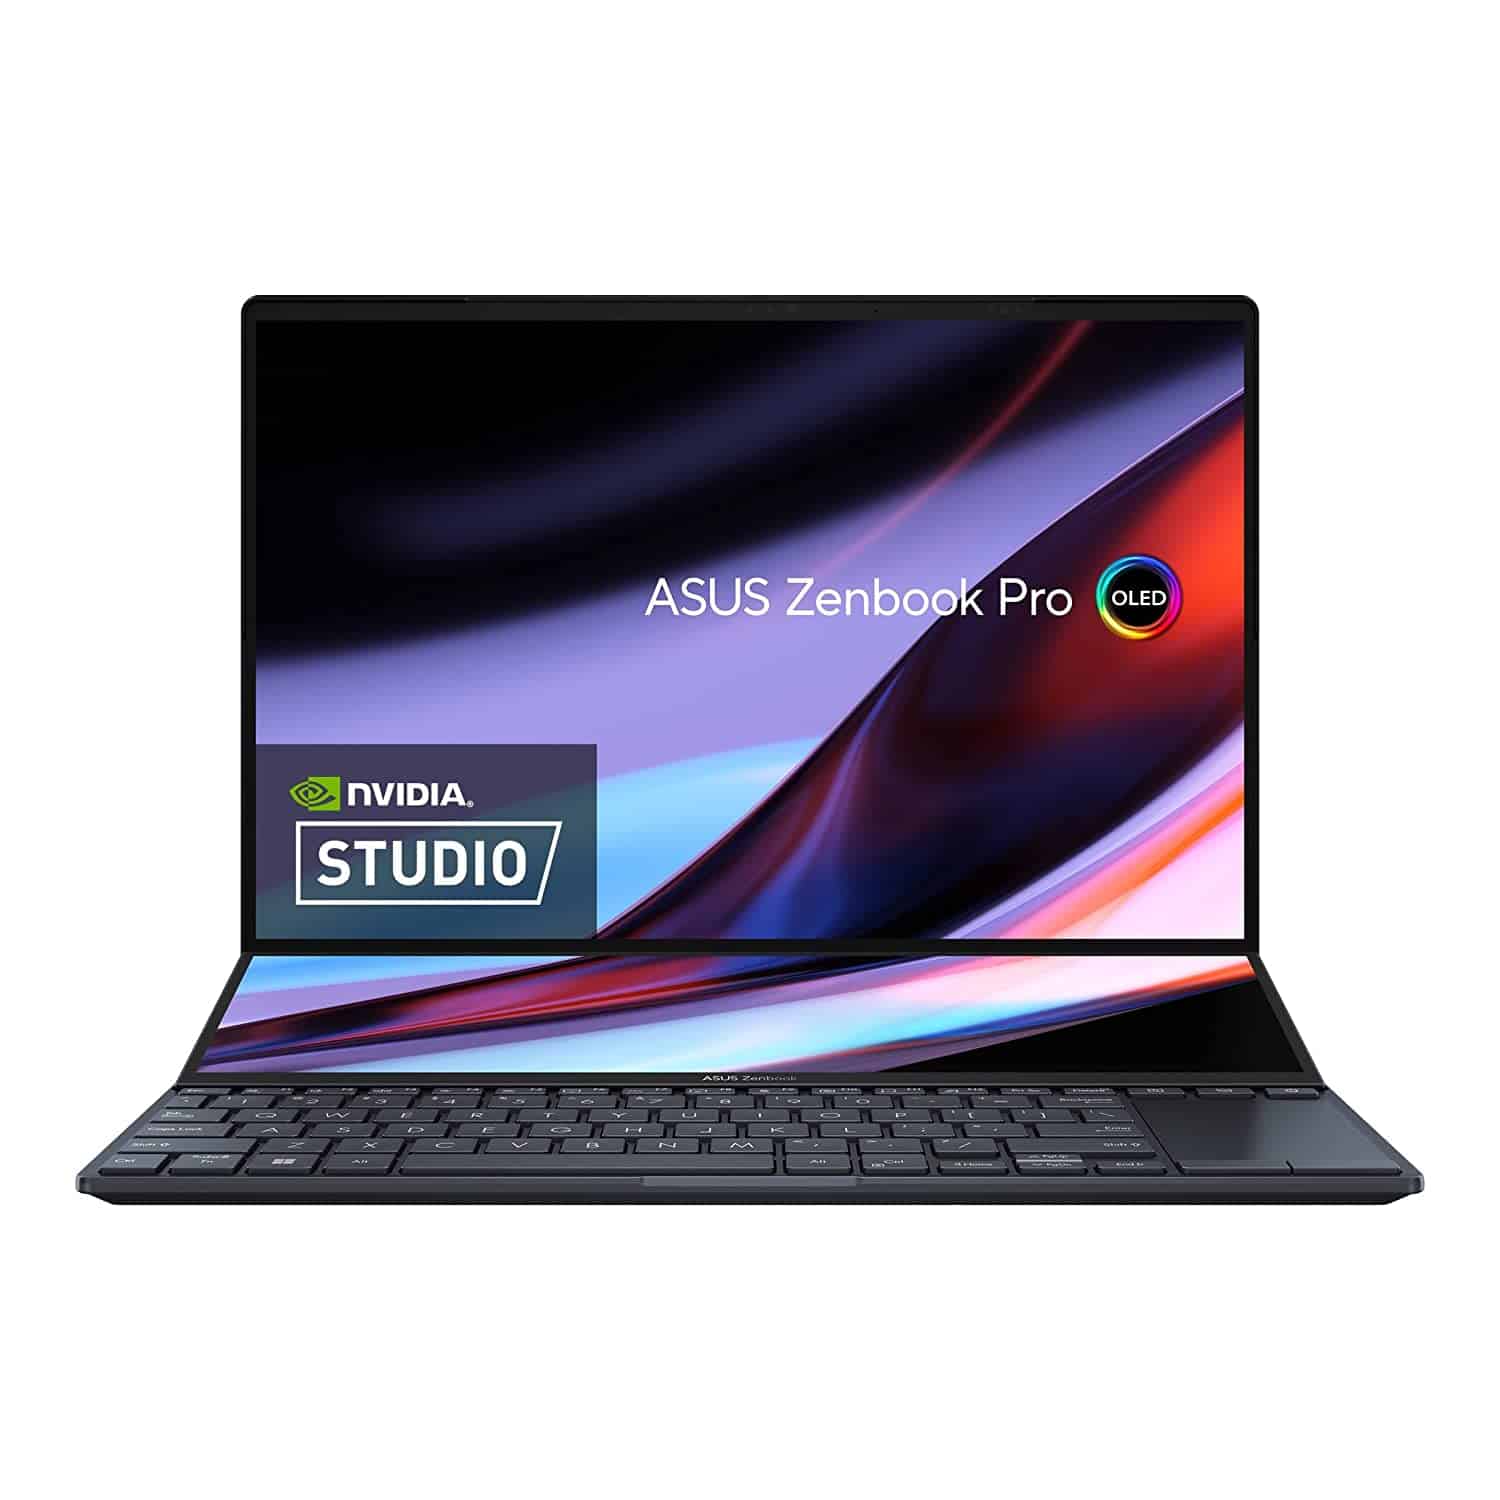 <strong style="background-color: transparent;">Asus Zenbook Pro 14 Duo OLED</strong>